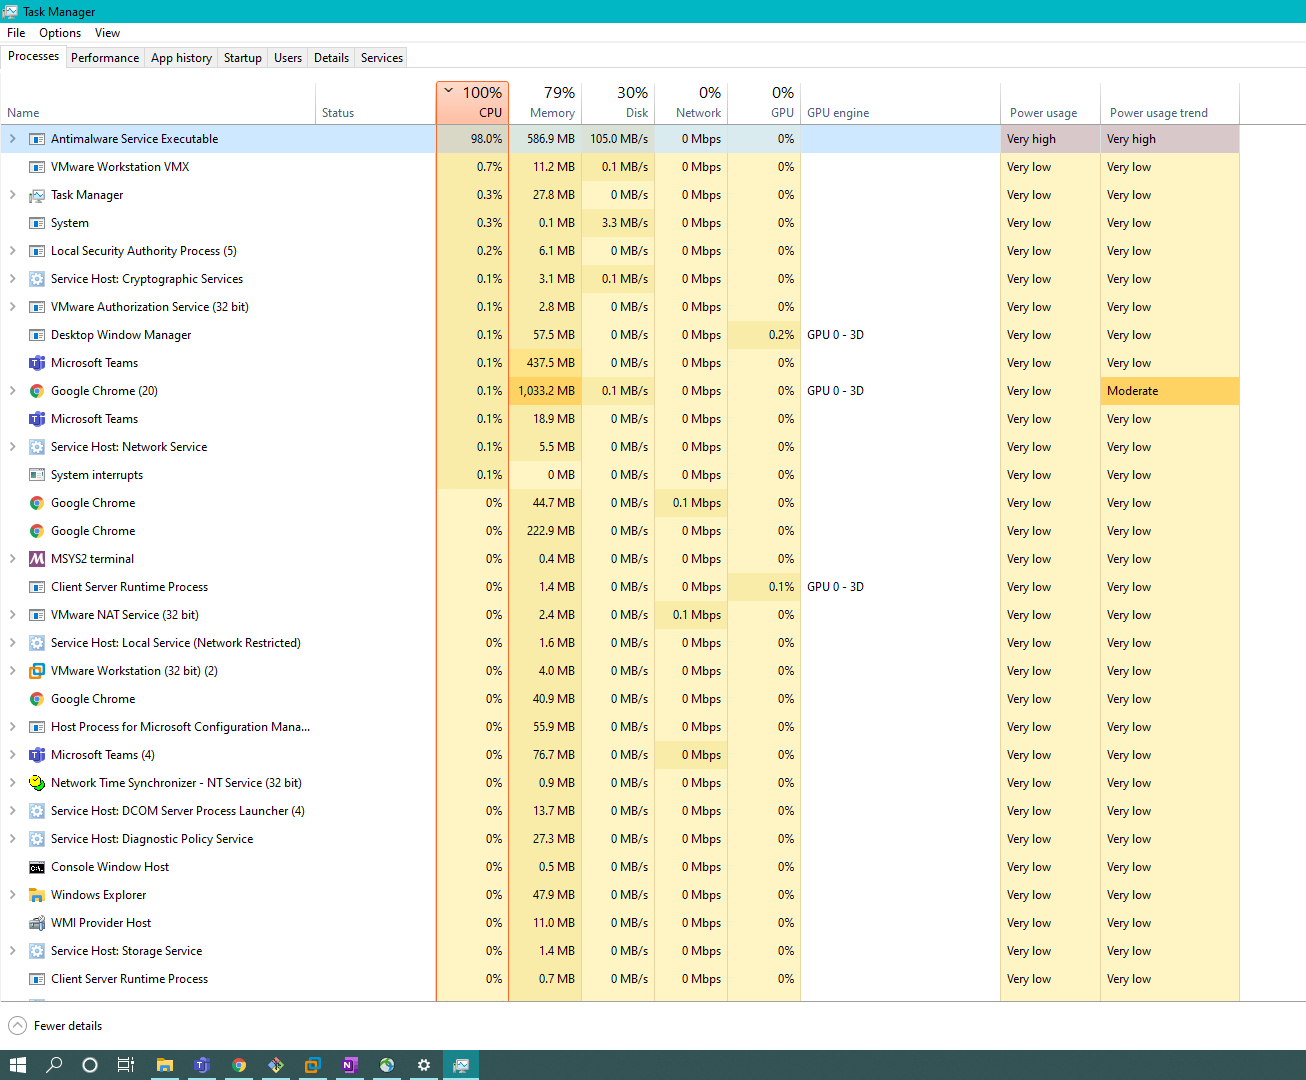 98% CPU by Antimalware Service Executable 15276145-478a-4366-b1df-ebb43bf7ec7d?upload=true.png